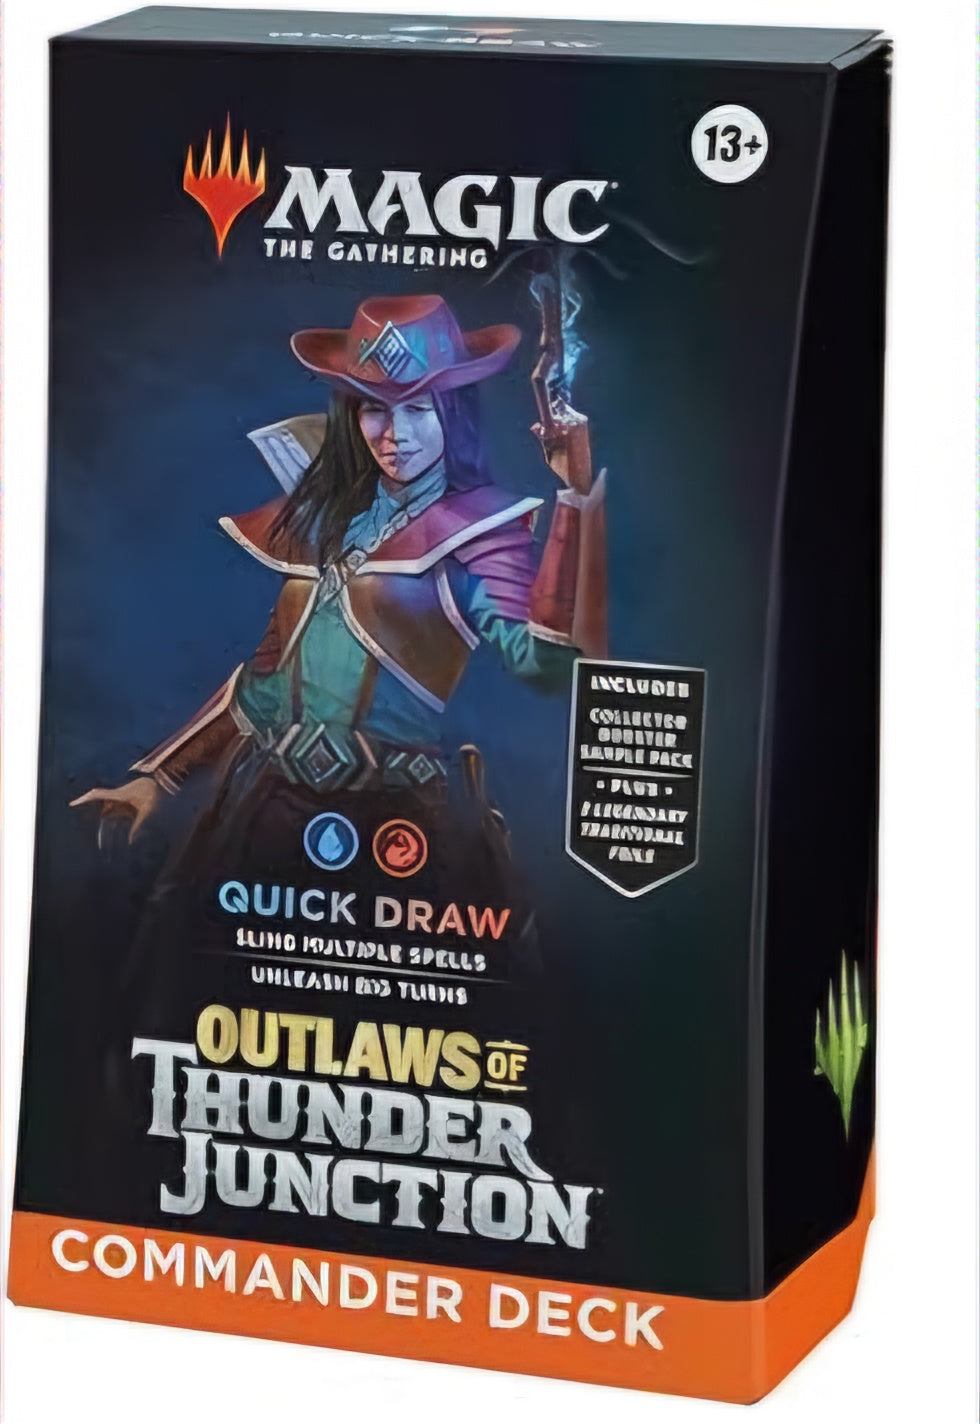 Magic the Gathering: Outlaws of Thunder Junction Commander Precon Deck